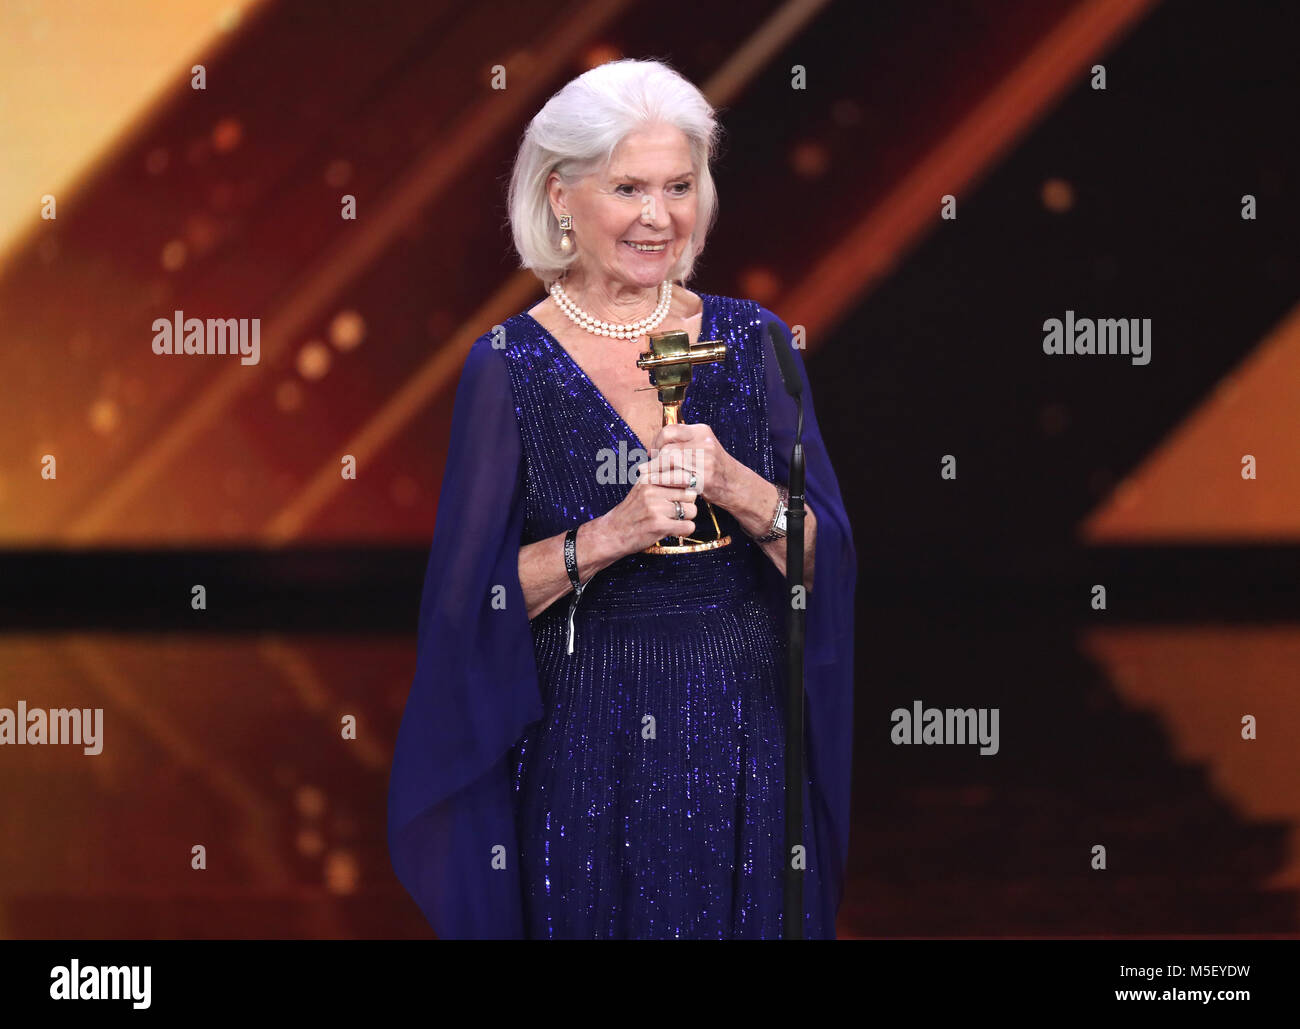 22 February 2018, Germany, Hamburg, 53rd Golden Camera Awards: Actress Christiane  Hoerbiger stand with her trophy on stage after being awarded in the  category 'Live's work'. Photo: Christian Charisius/dpa-Pool/dpa Stock Photo  -